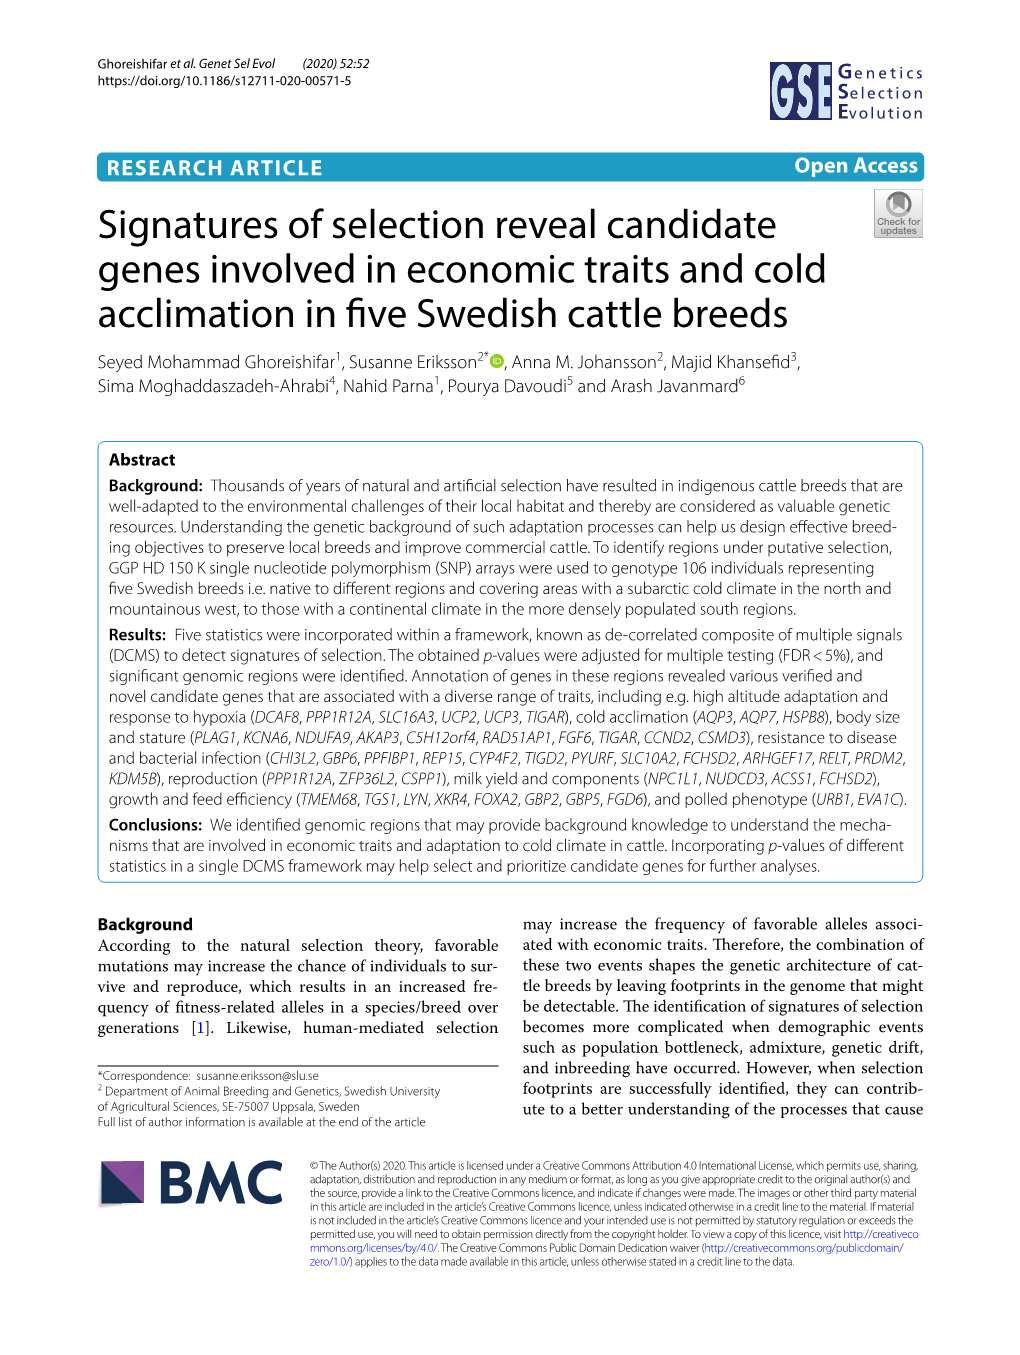 Pdf Ovrig​T/ Ferentiation Between Subpopulations of Swedish Mountain (Fjäll and Ovr2g​B.Pdf